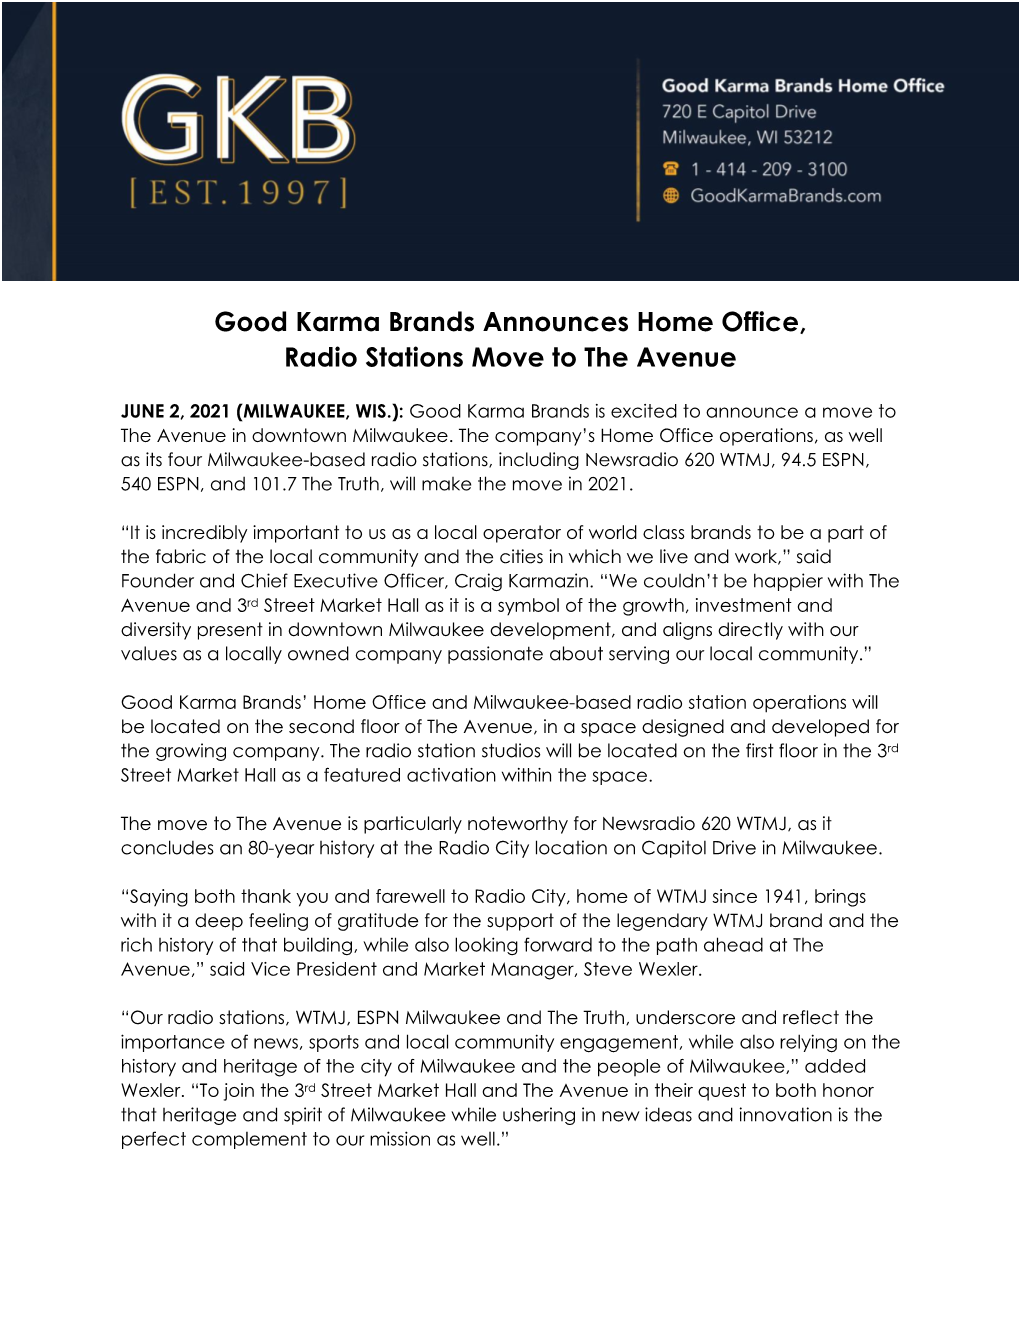 Good Karma Brands Announces Home Office, Radio Stations Move to the Avenue